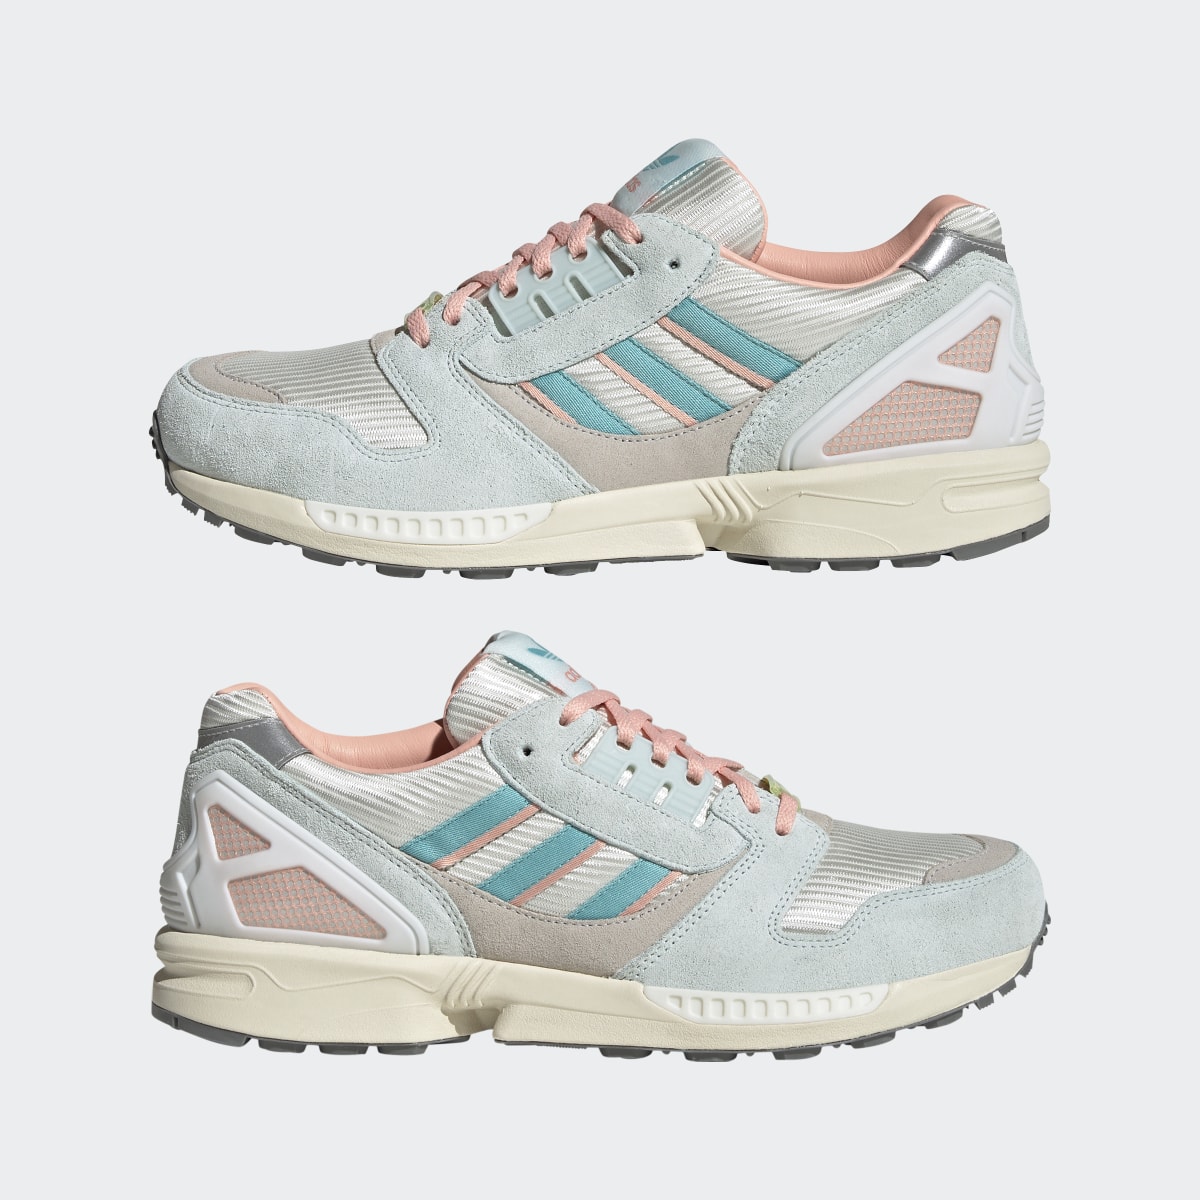 Adidas ZX 8000 Shoes. 8